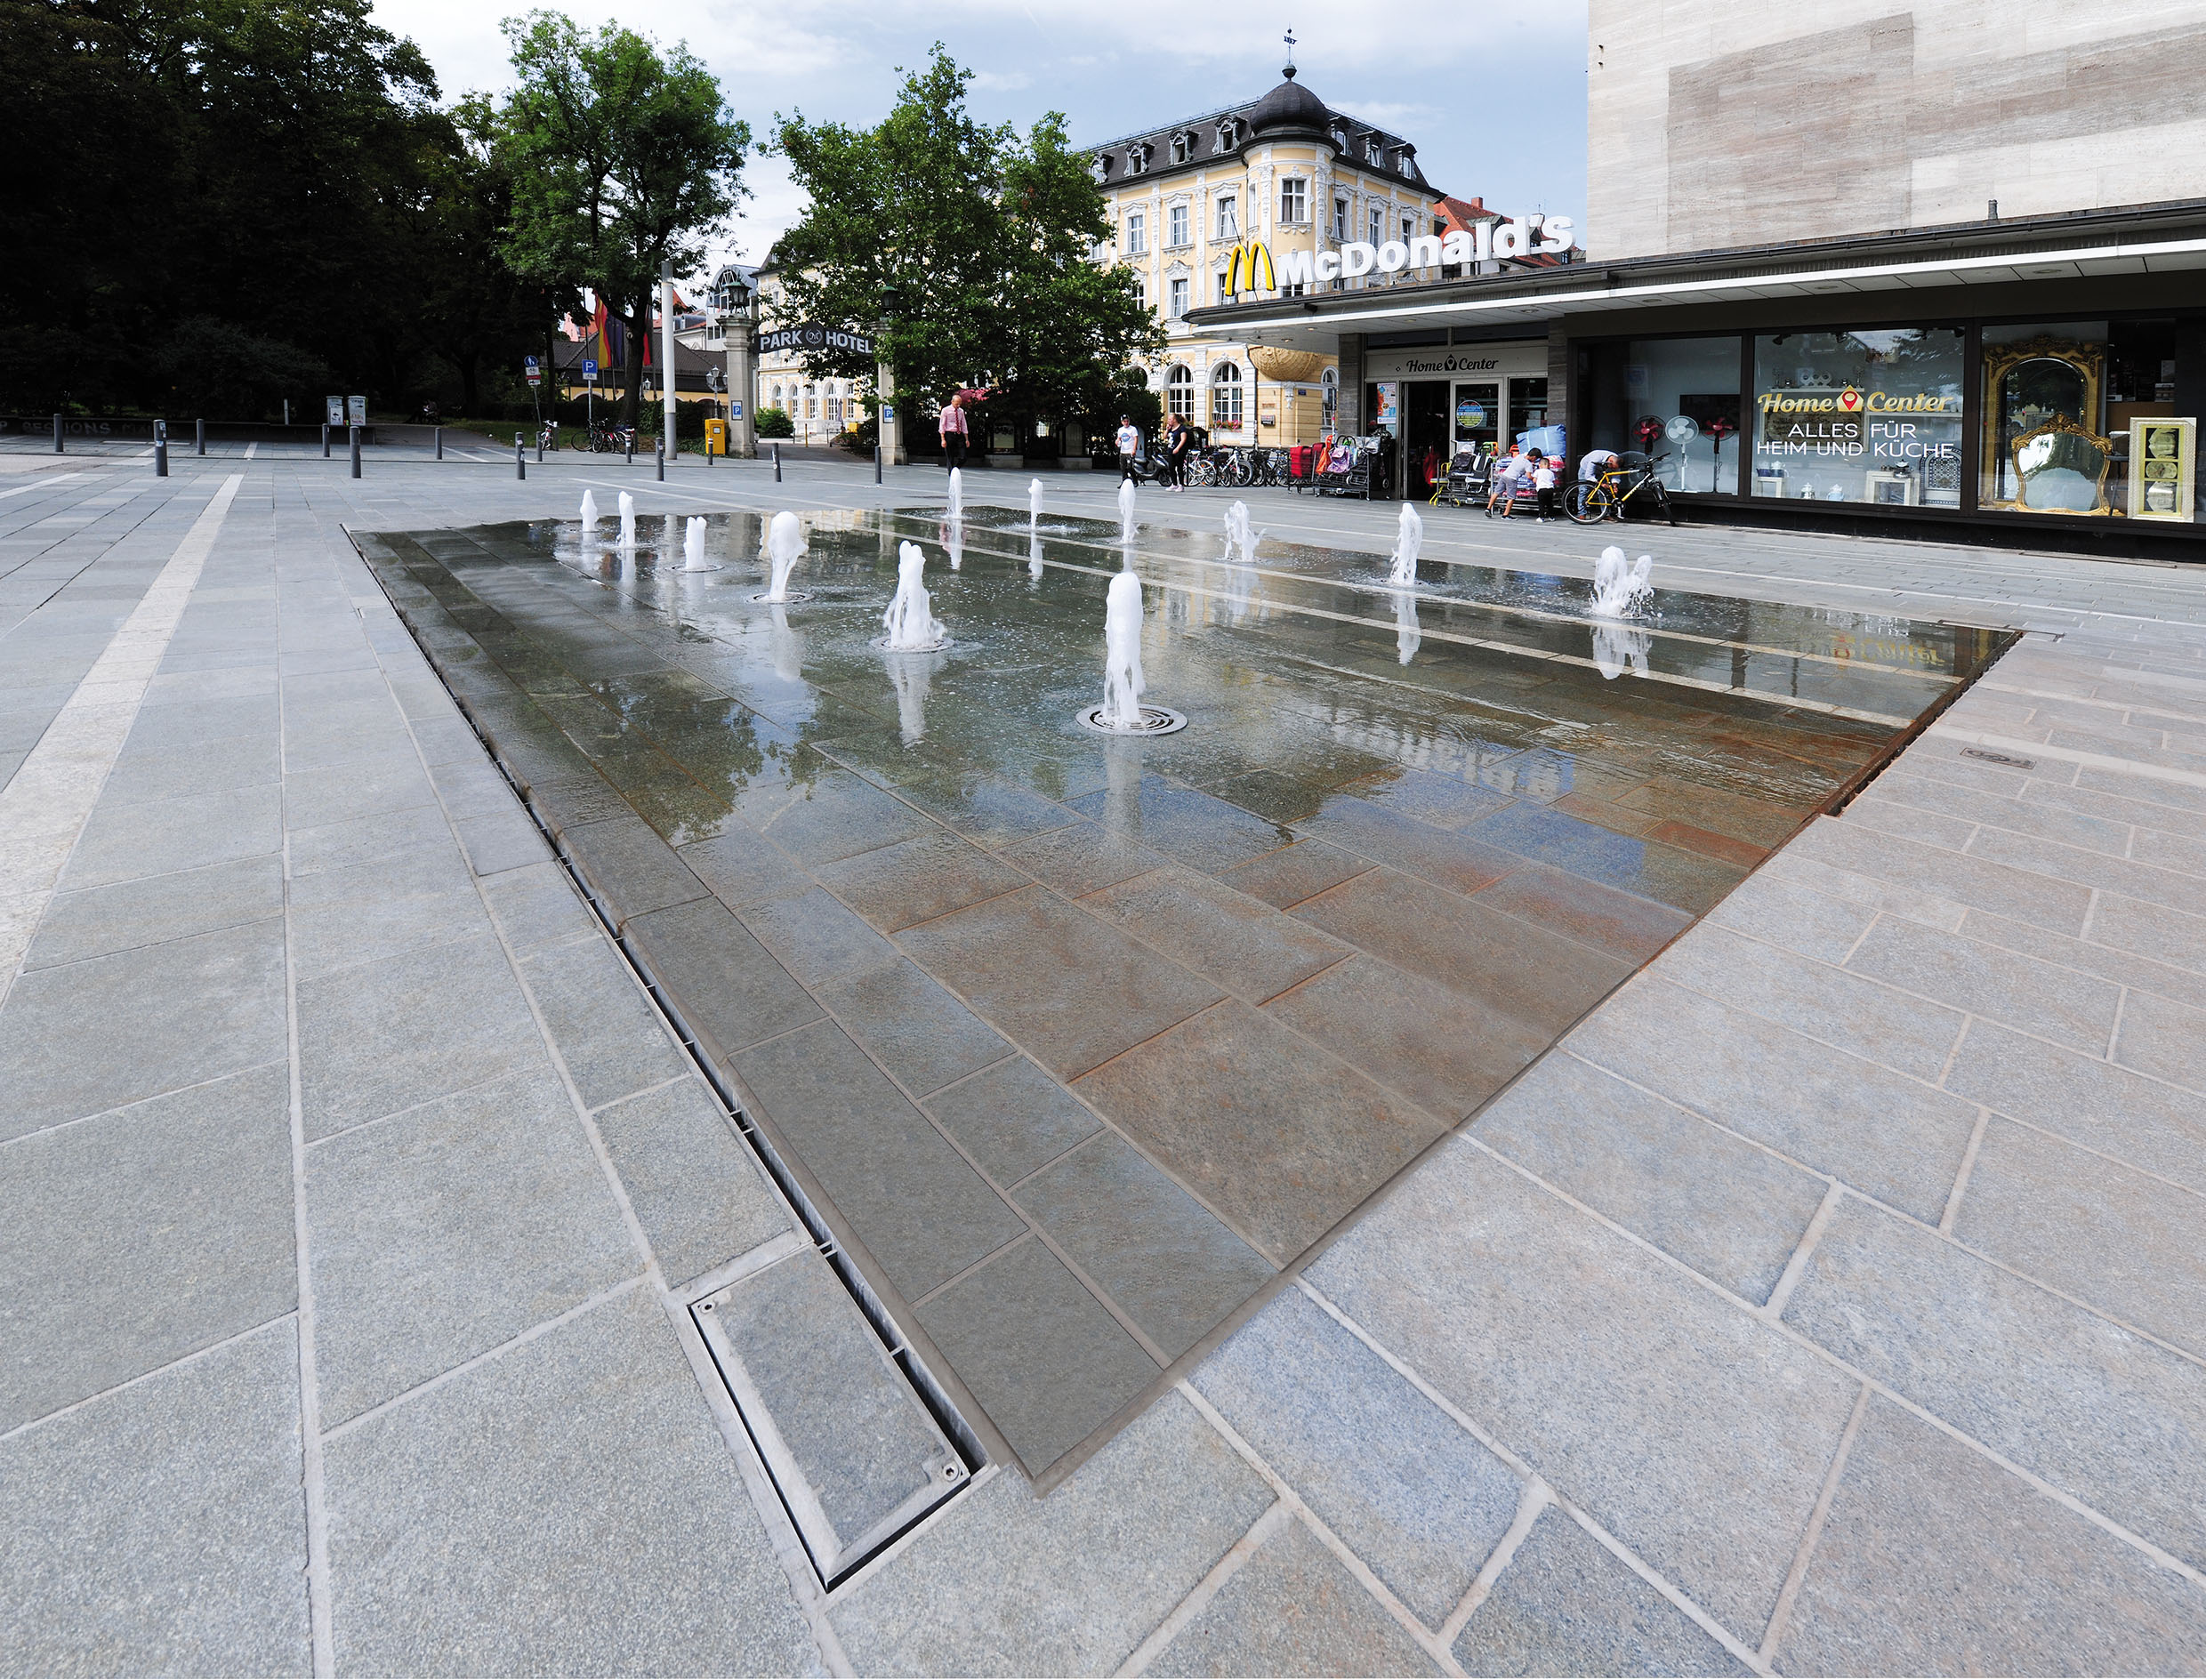 A new fountain was brought to life on Ernst Reuter Platz in Regensburg after extensive renovations to the square.